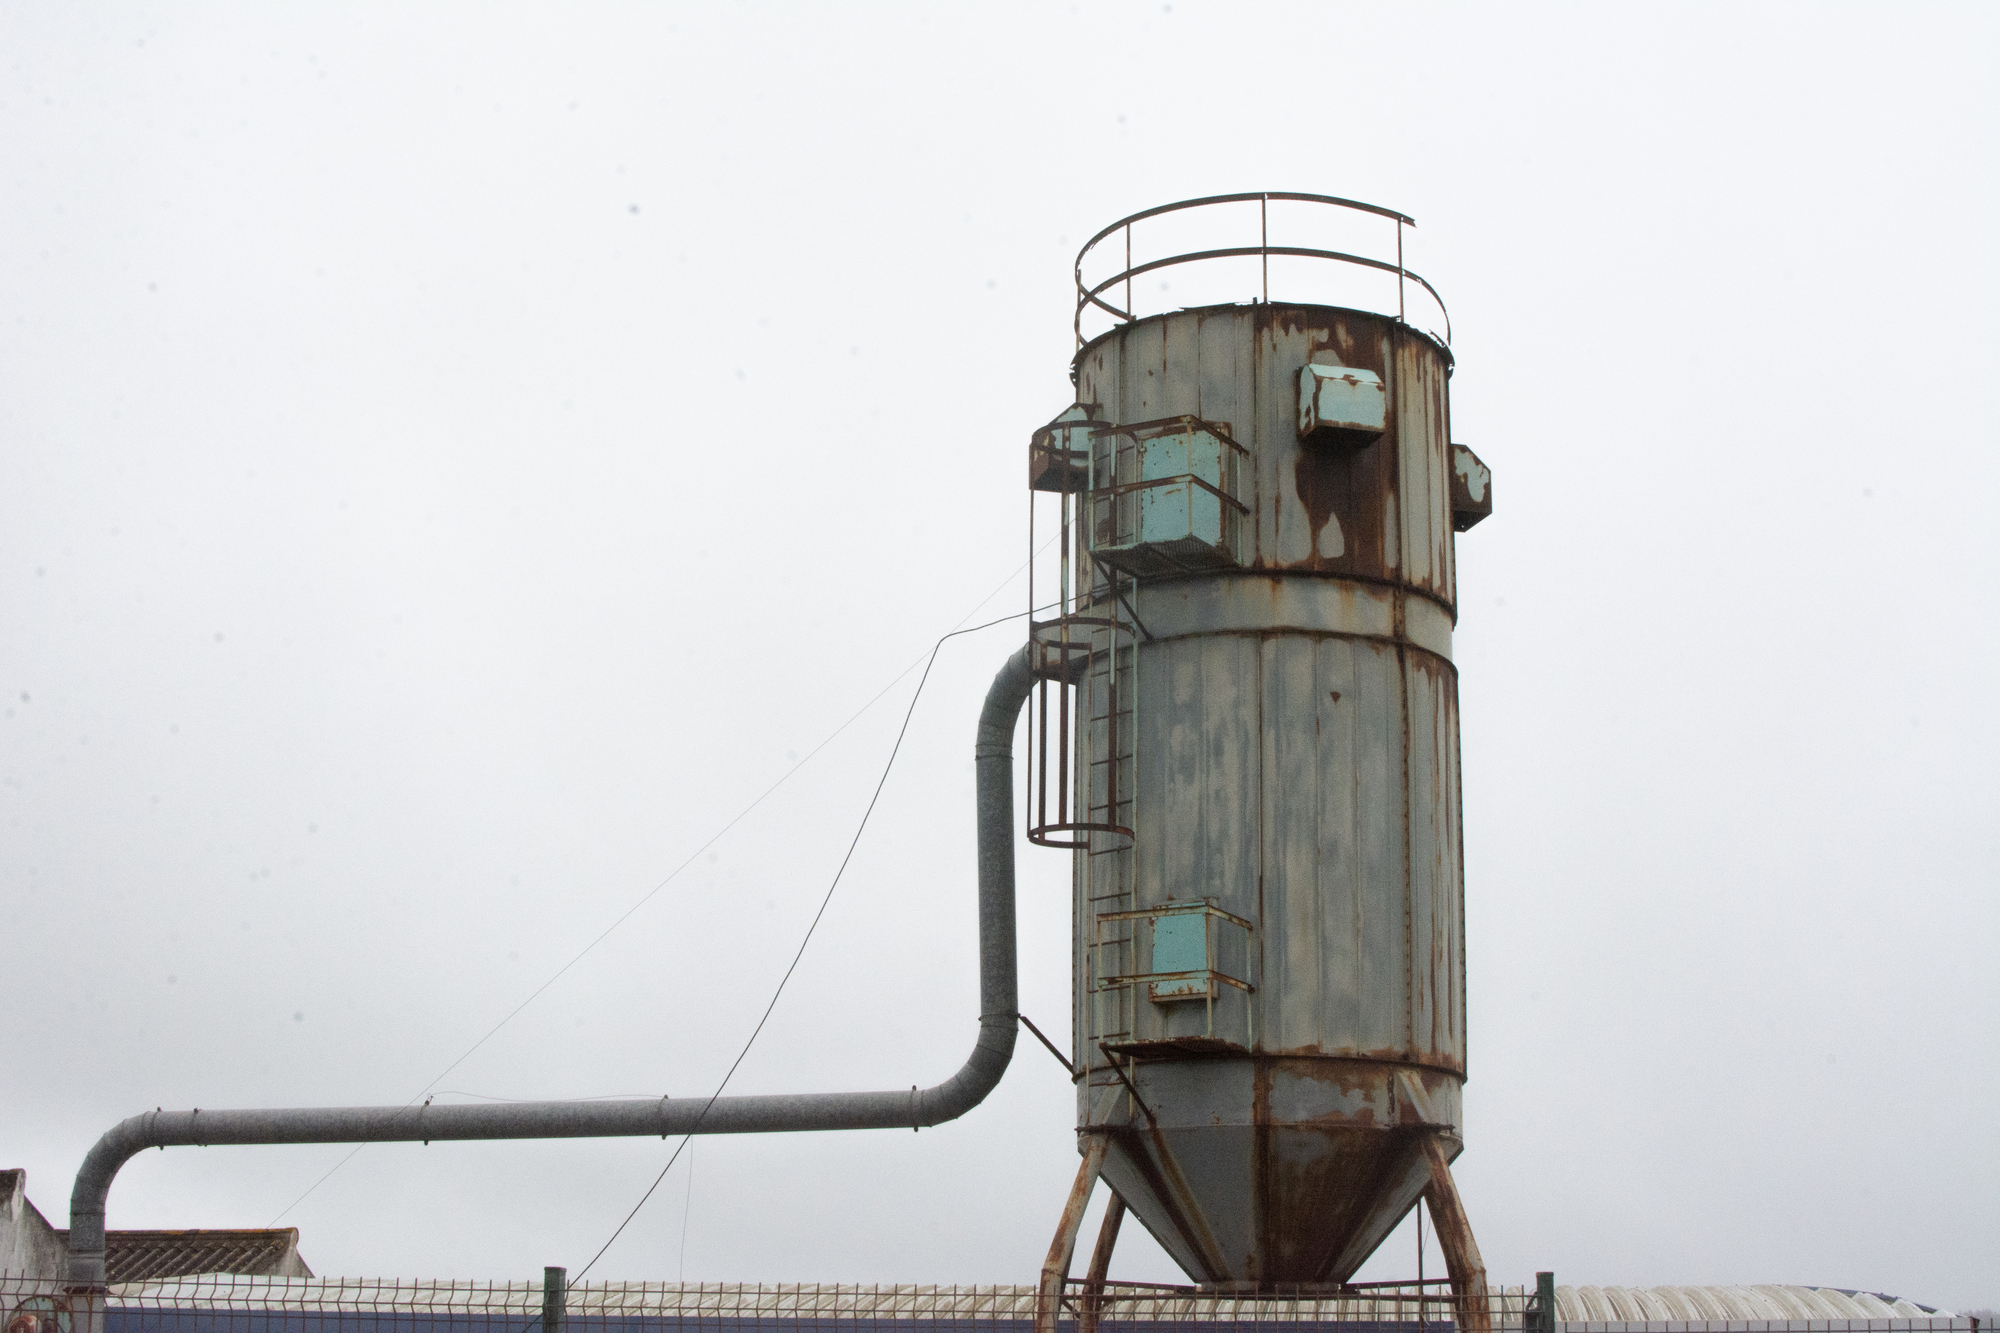 Rusty industrial silo with pipe against a cloudy sky.